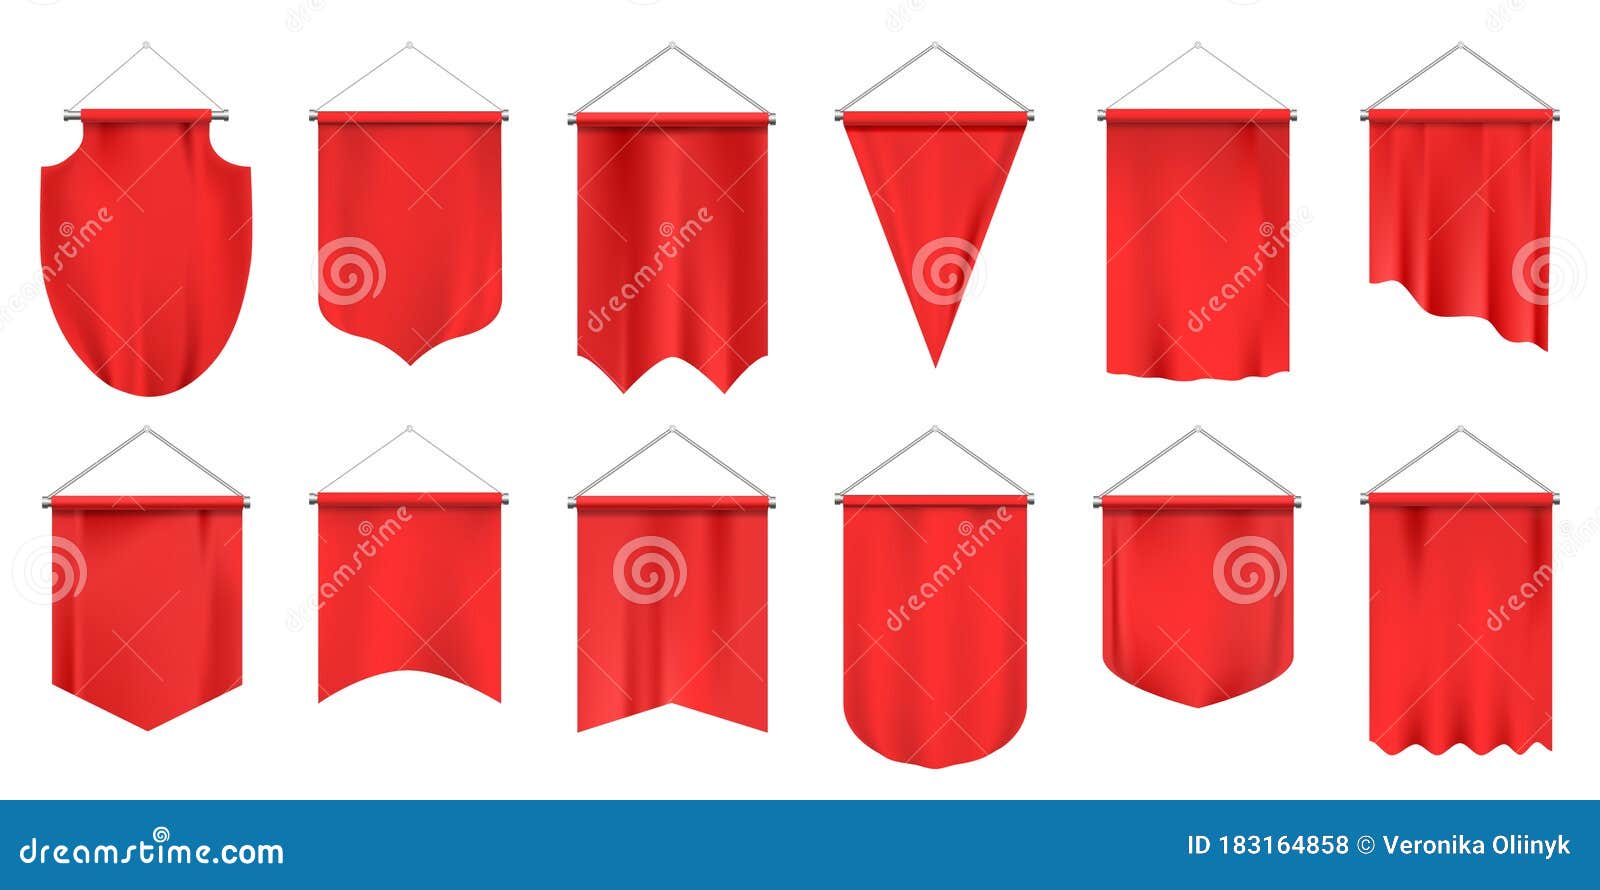 Realistic Textile Pennants. Empty 3d Flags, Red Fabric Hanging Pennant,  Advertising or Royal Award Mockups Isolated Stock Vector - Illustration of  royal, mock: 183164858